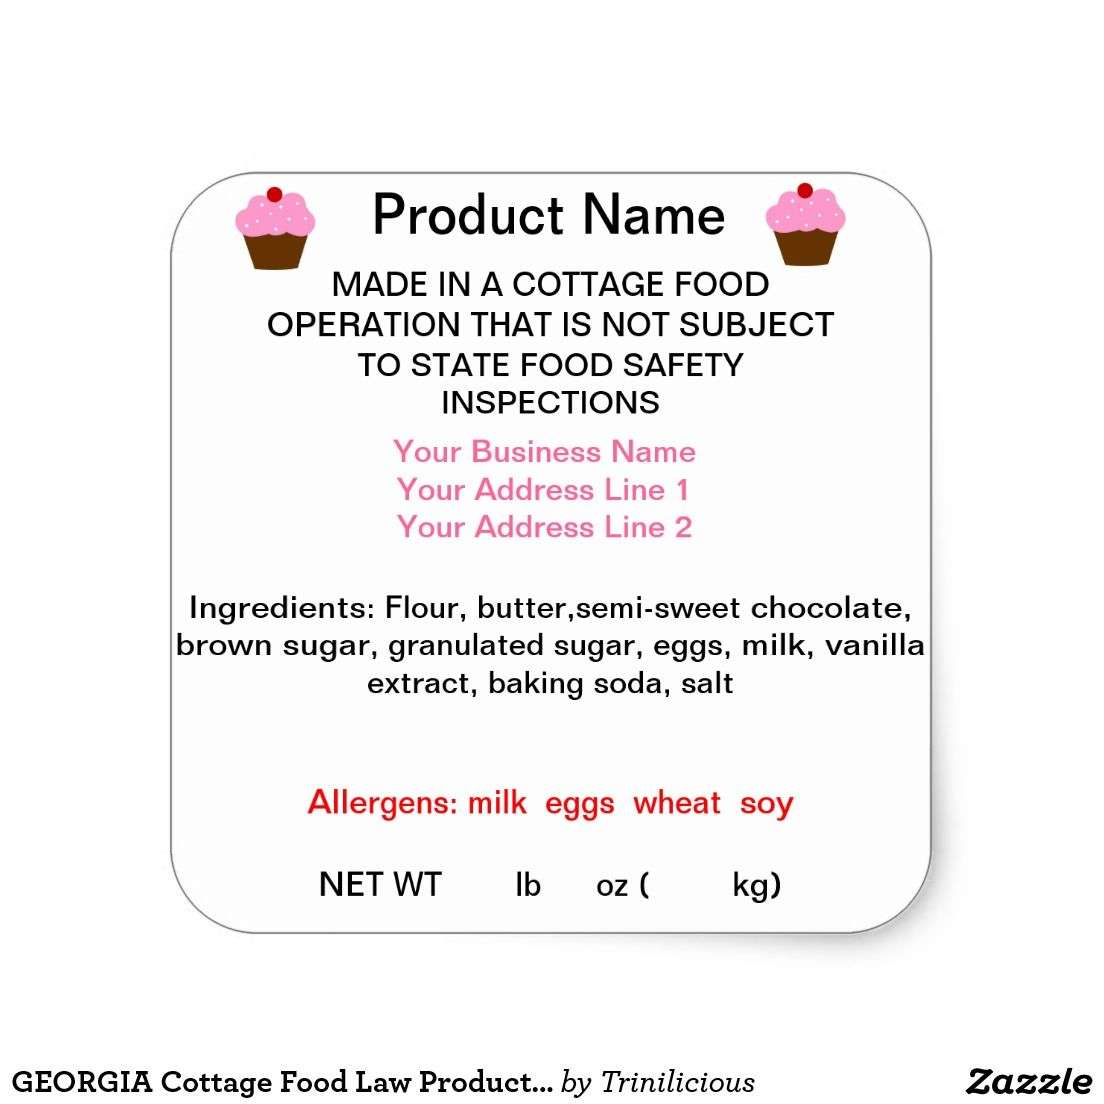 GEORGIA Cottage Food Law Product Labels